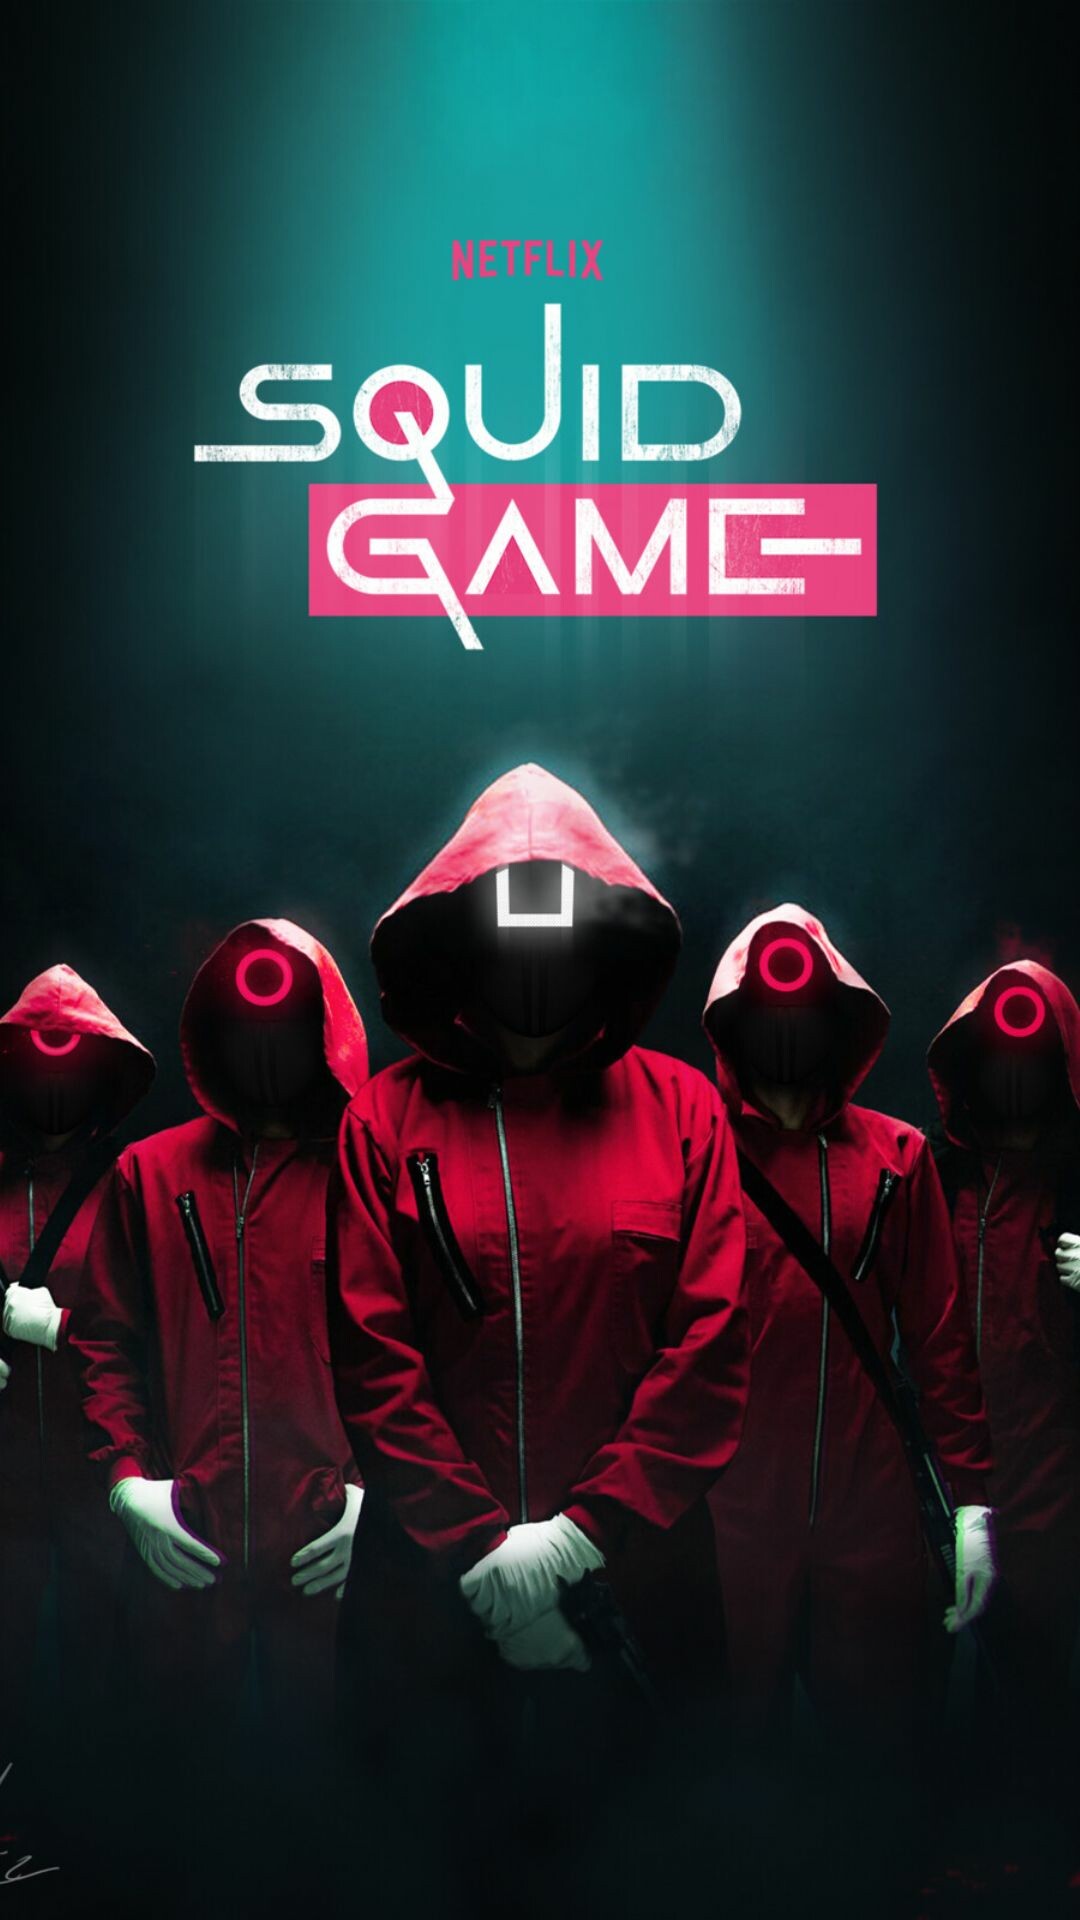 Netflix: Squid Game, An impressive TV show, Produced for the world's biggest streaming service. 1080x1920 Full HD Background.